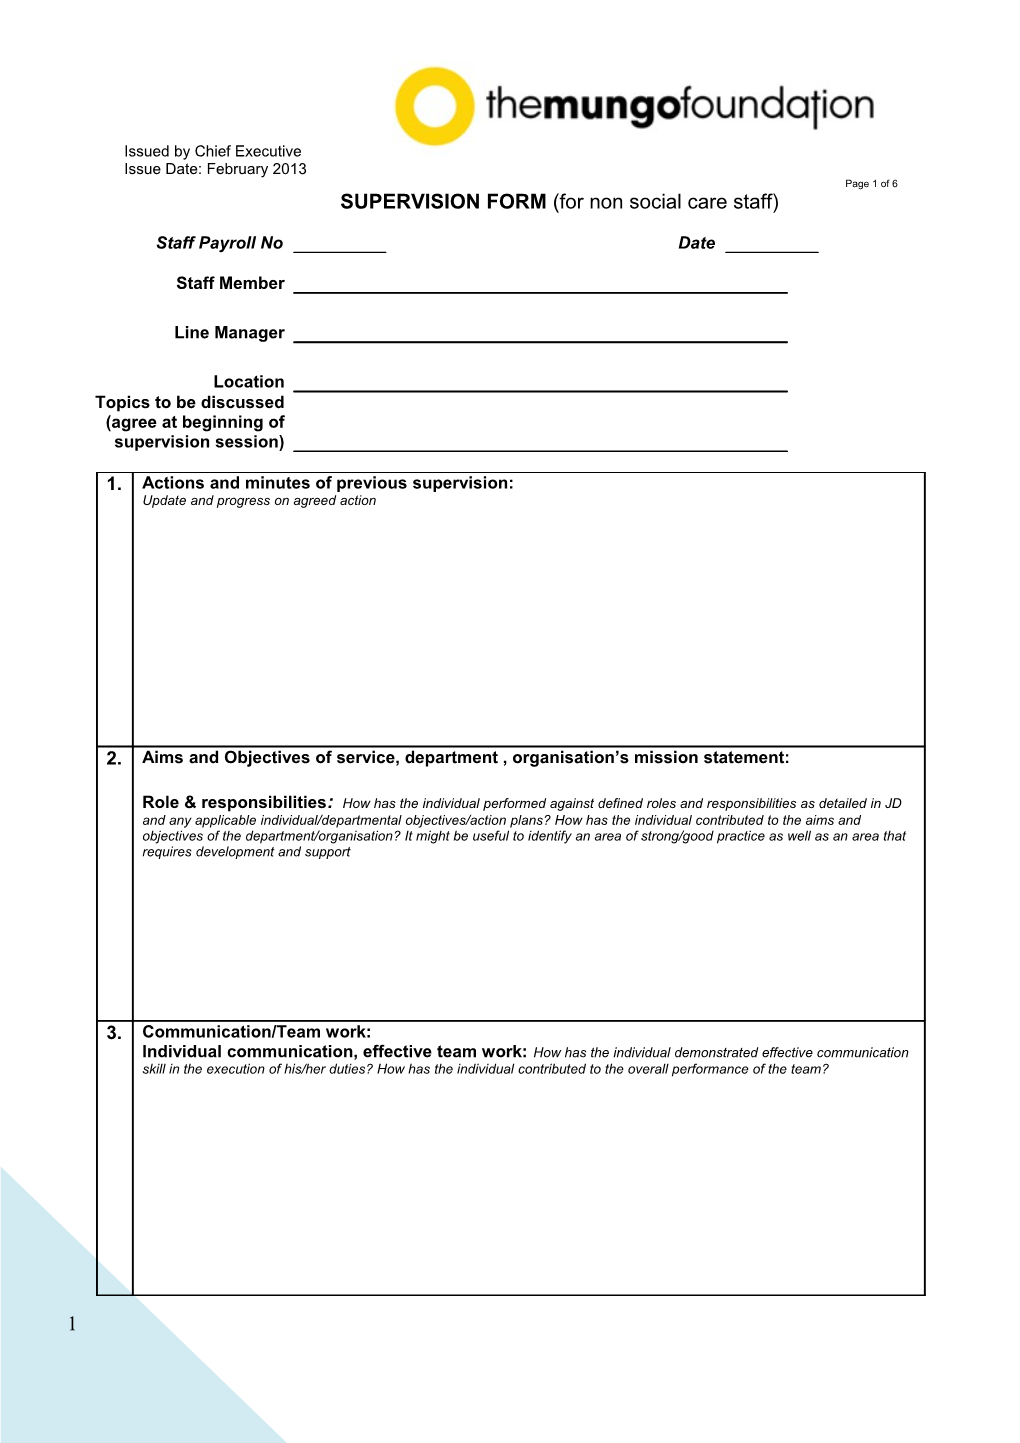 SUPERVISION FORM (For Non Social Care Staff)